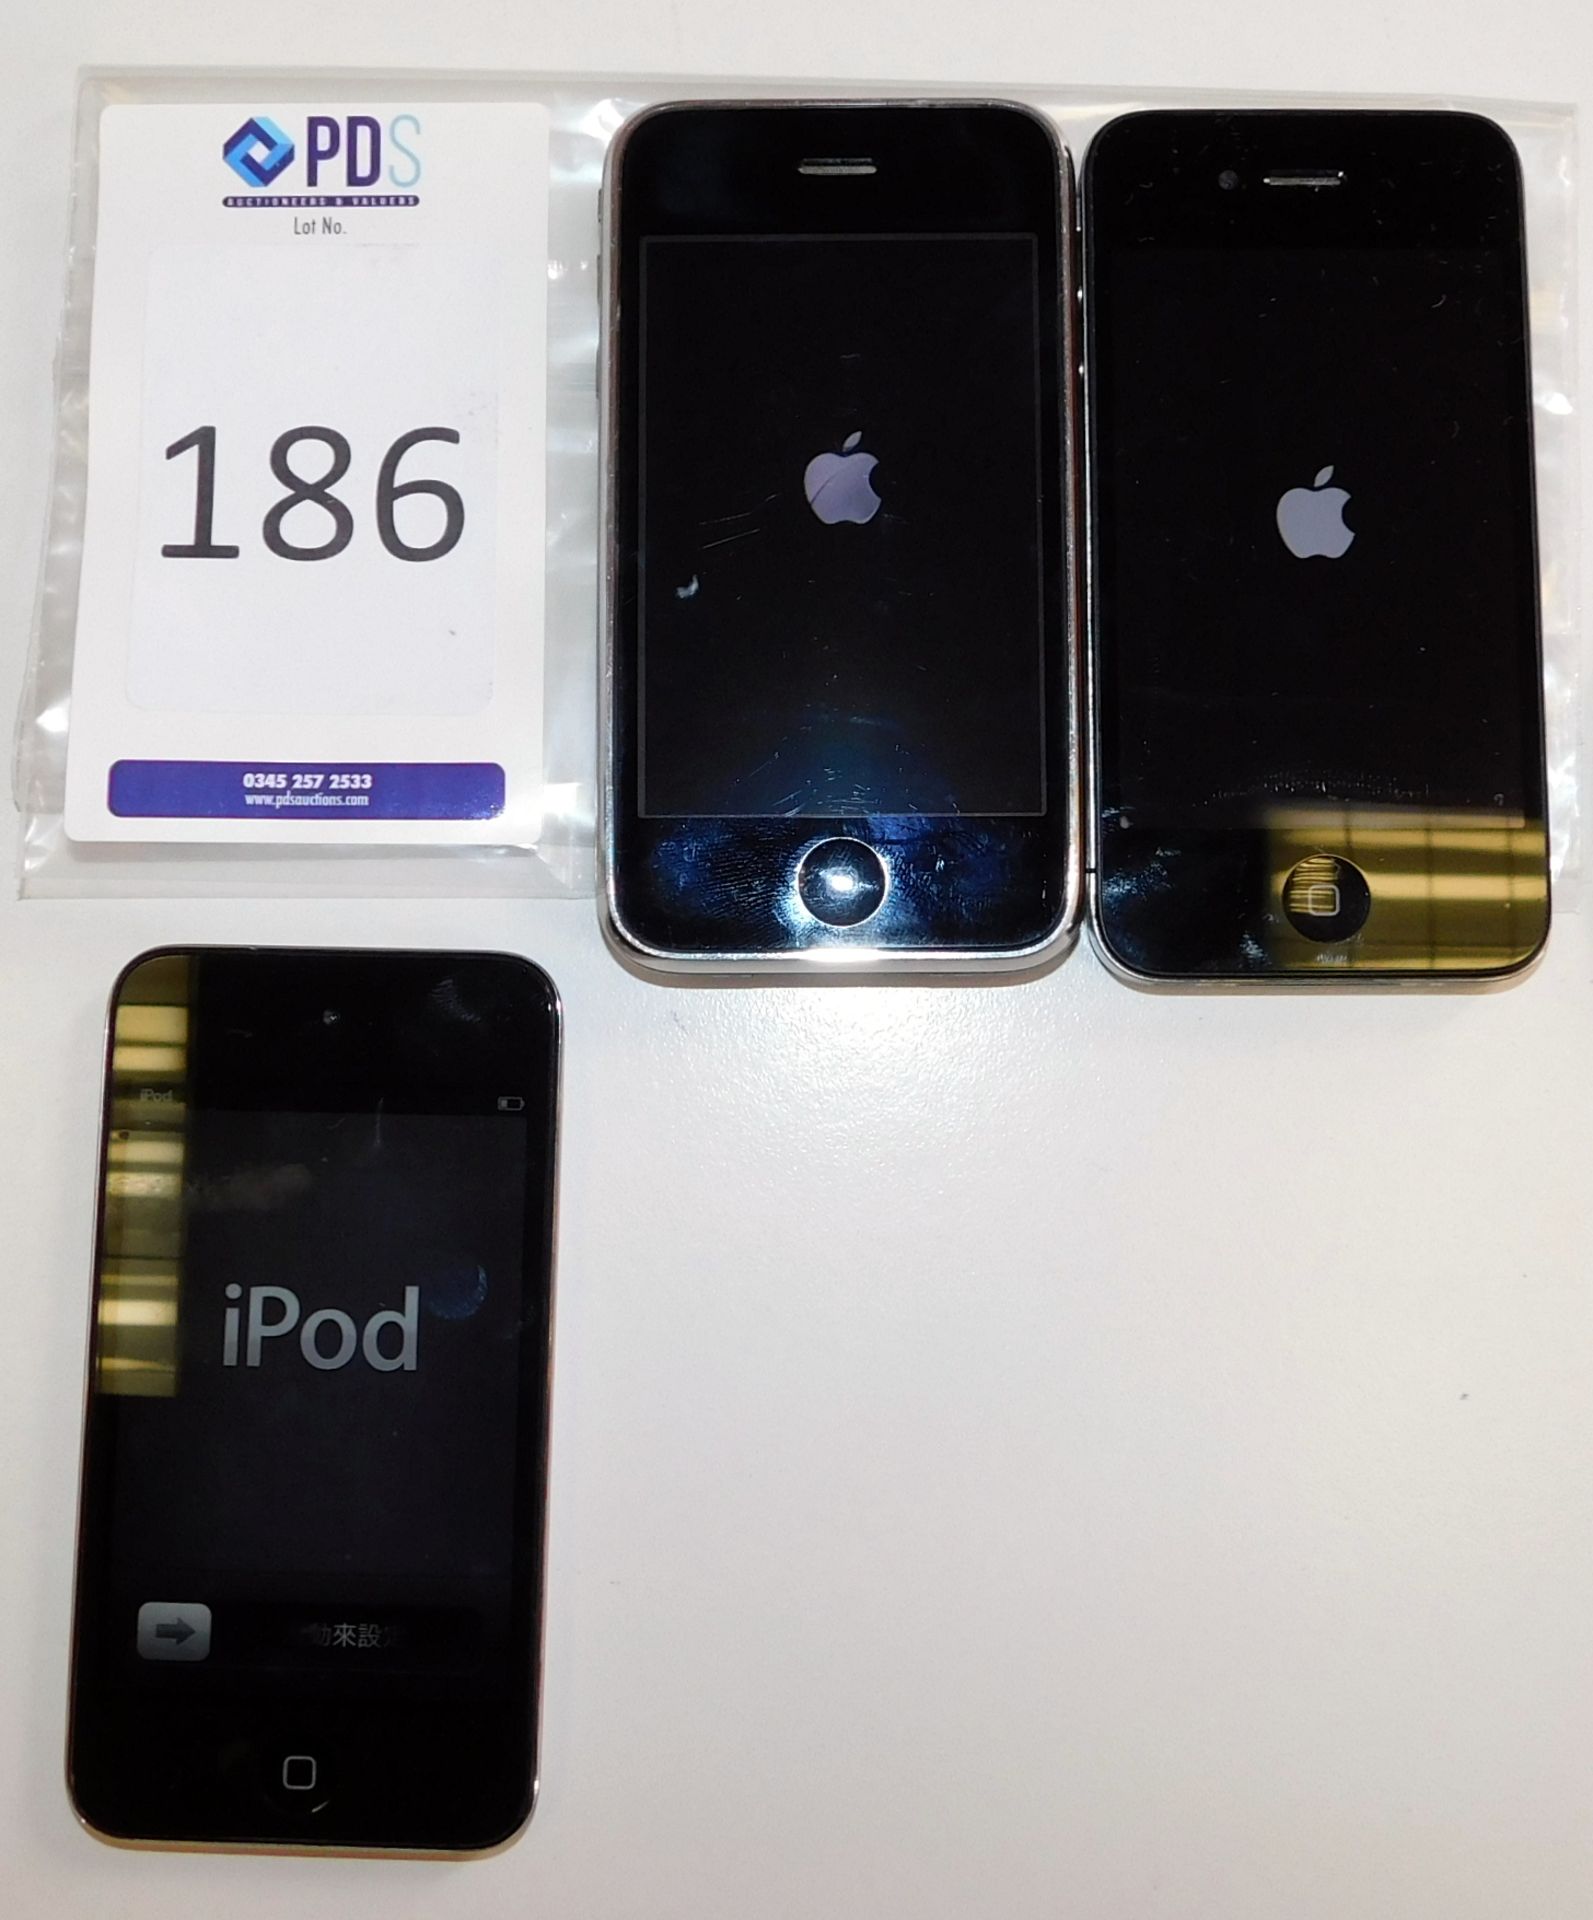 Apple iPhone 4 S/N; 830415U7A4S, Apple iPhone 3GS S/N; 86001L9K3NP & Apple iPod Touch S/N;